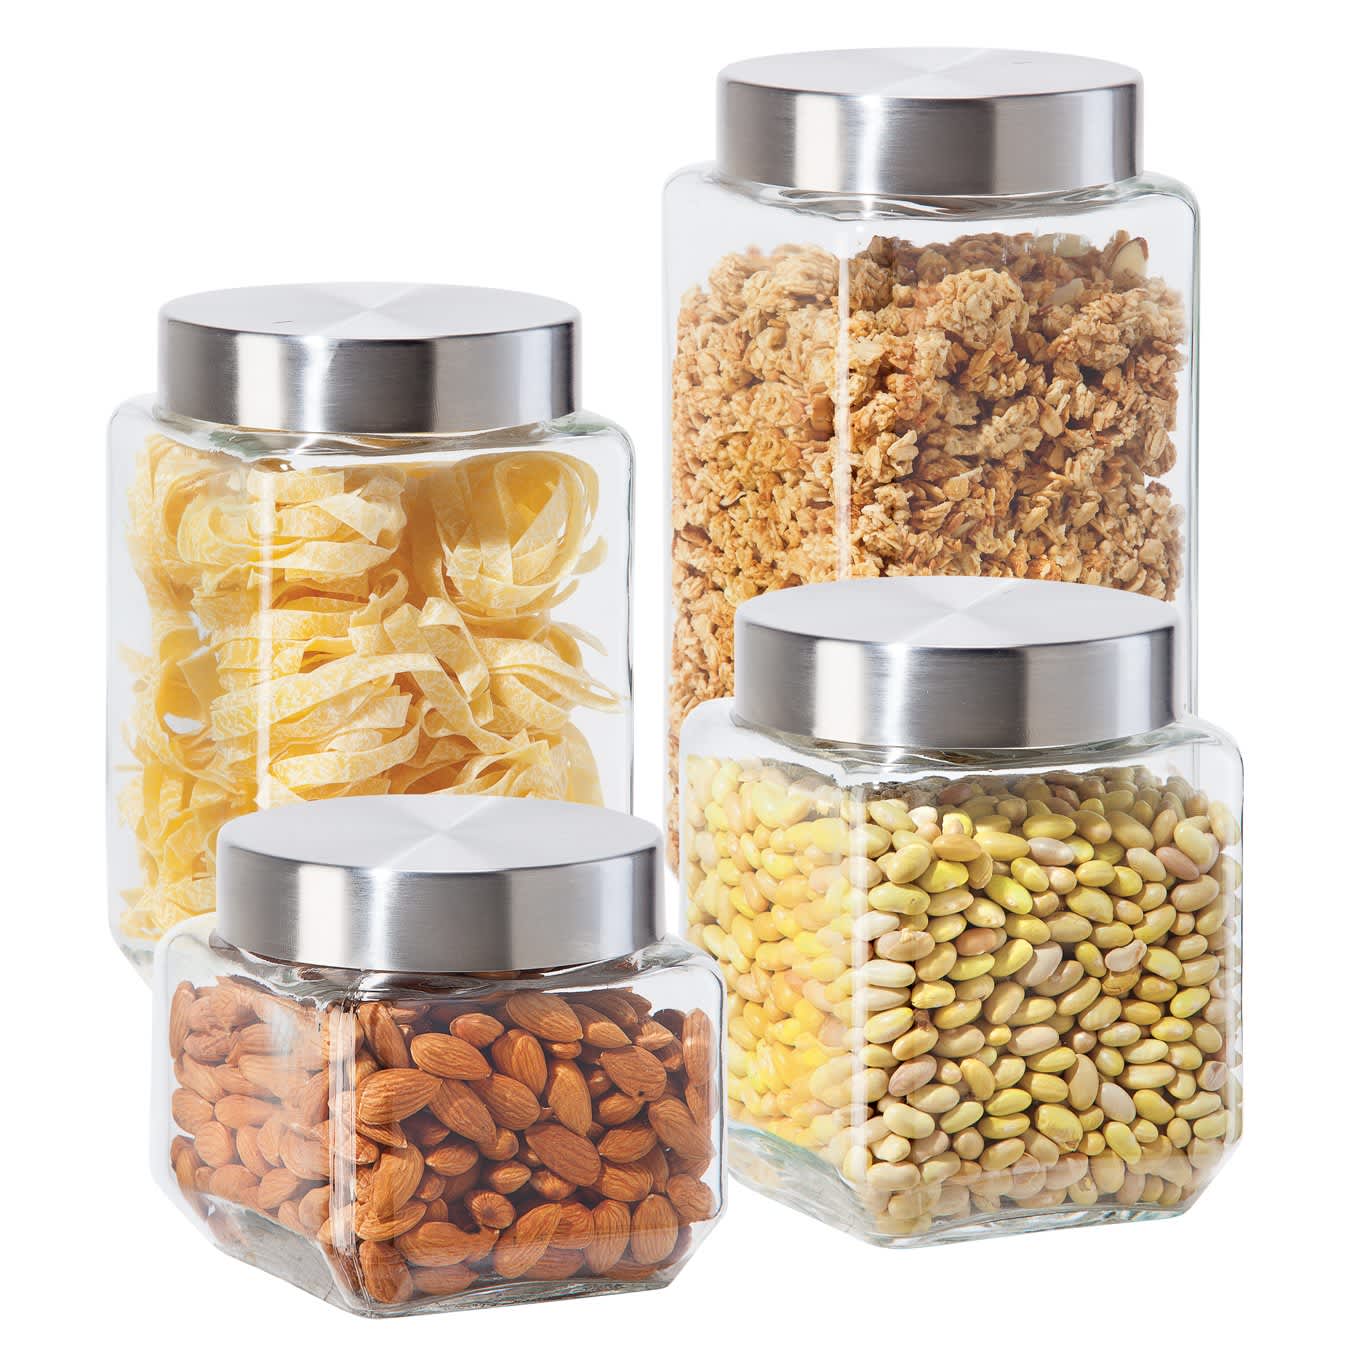 30 Best Glass (storage) Containers ideas